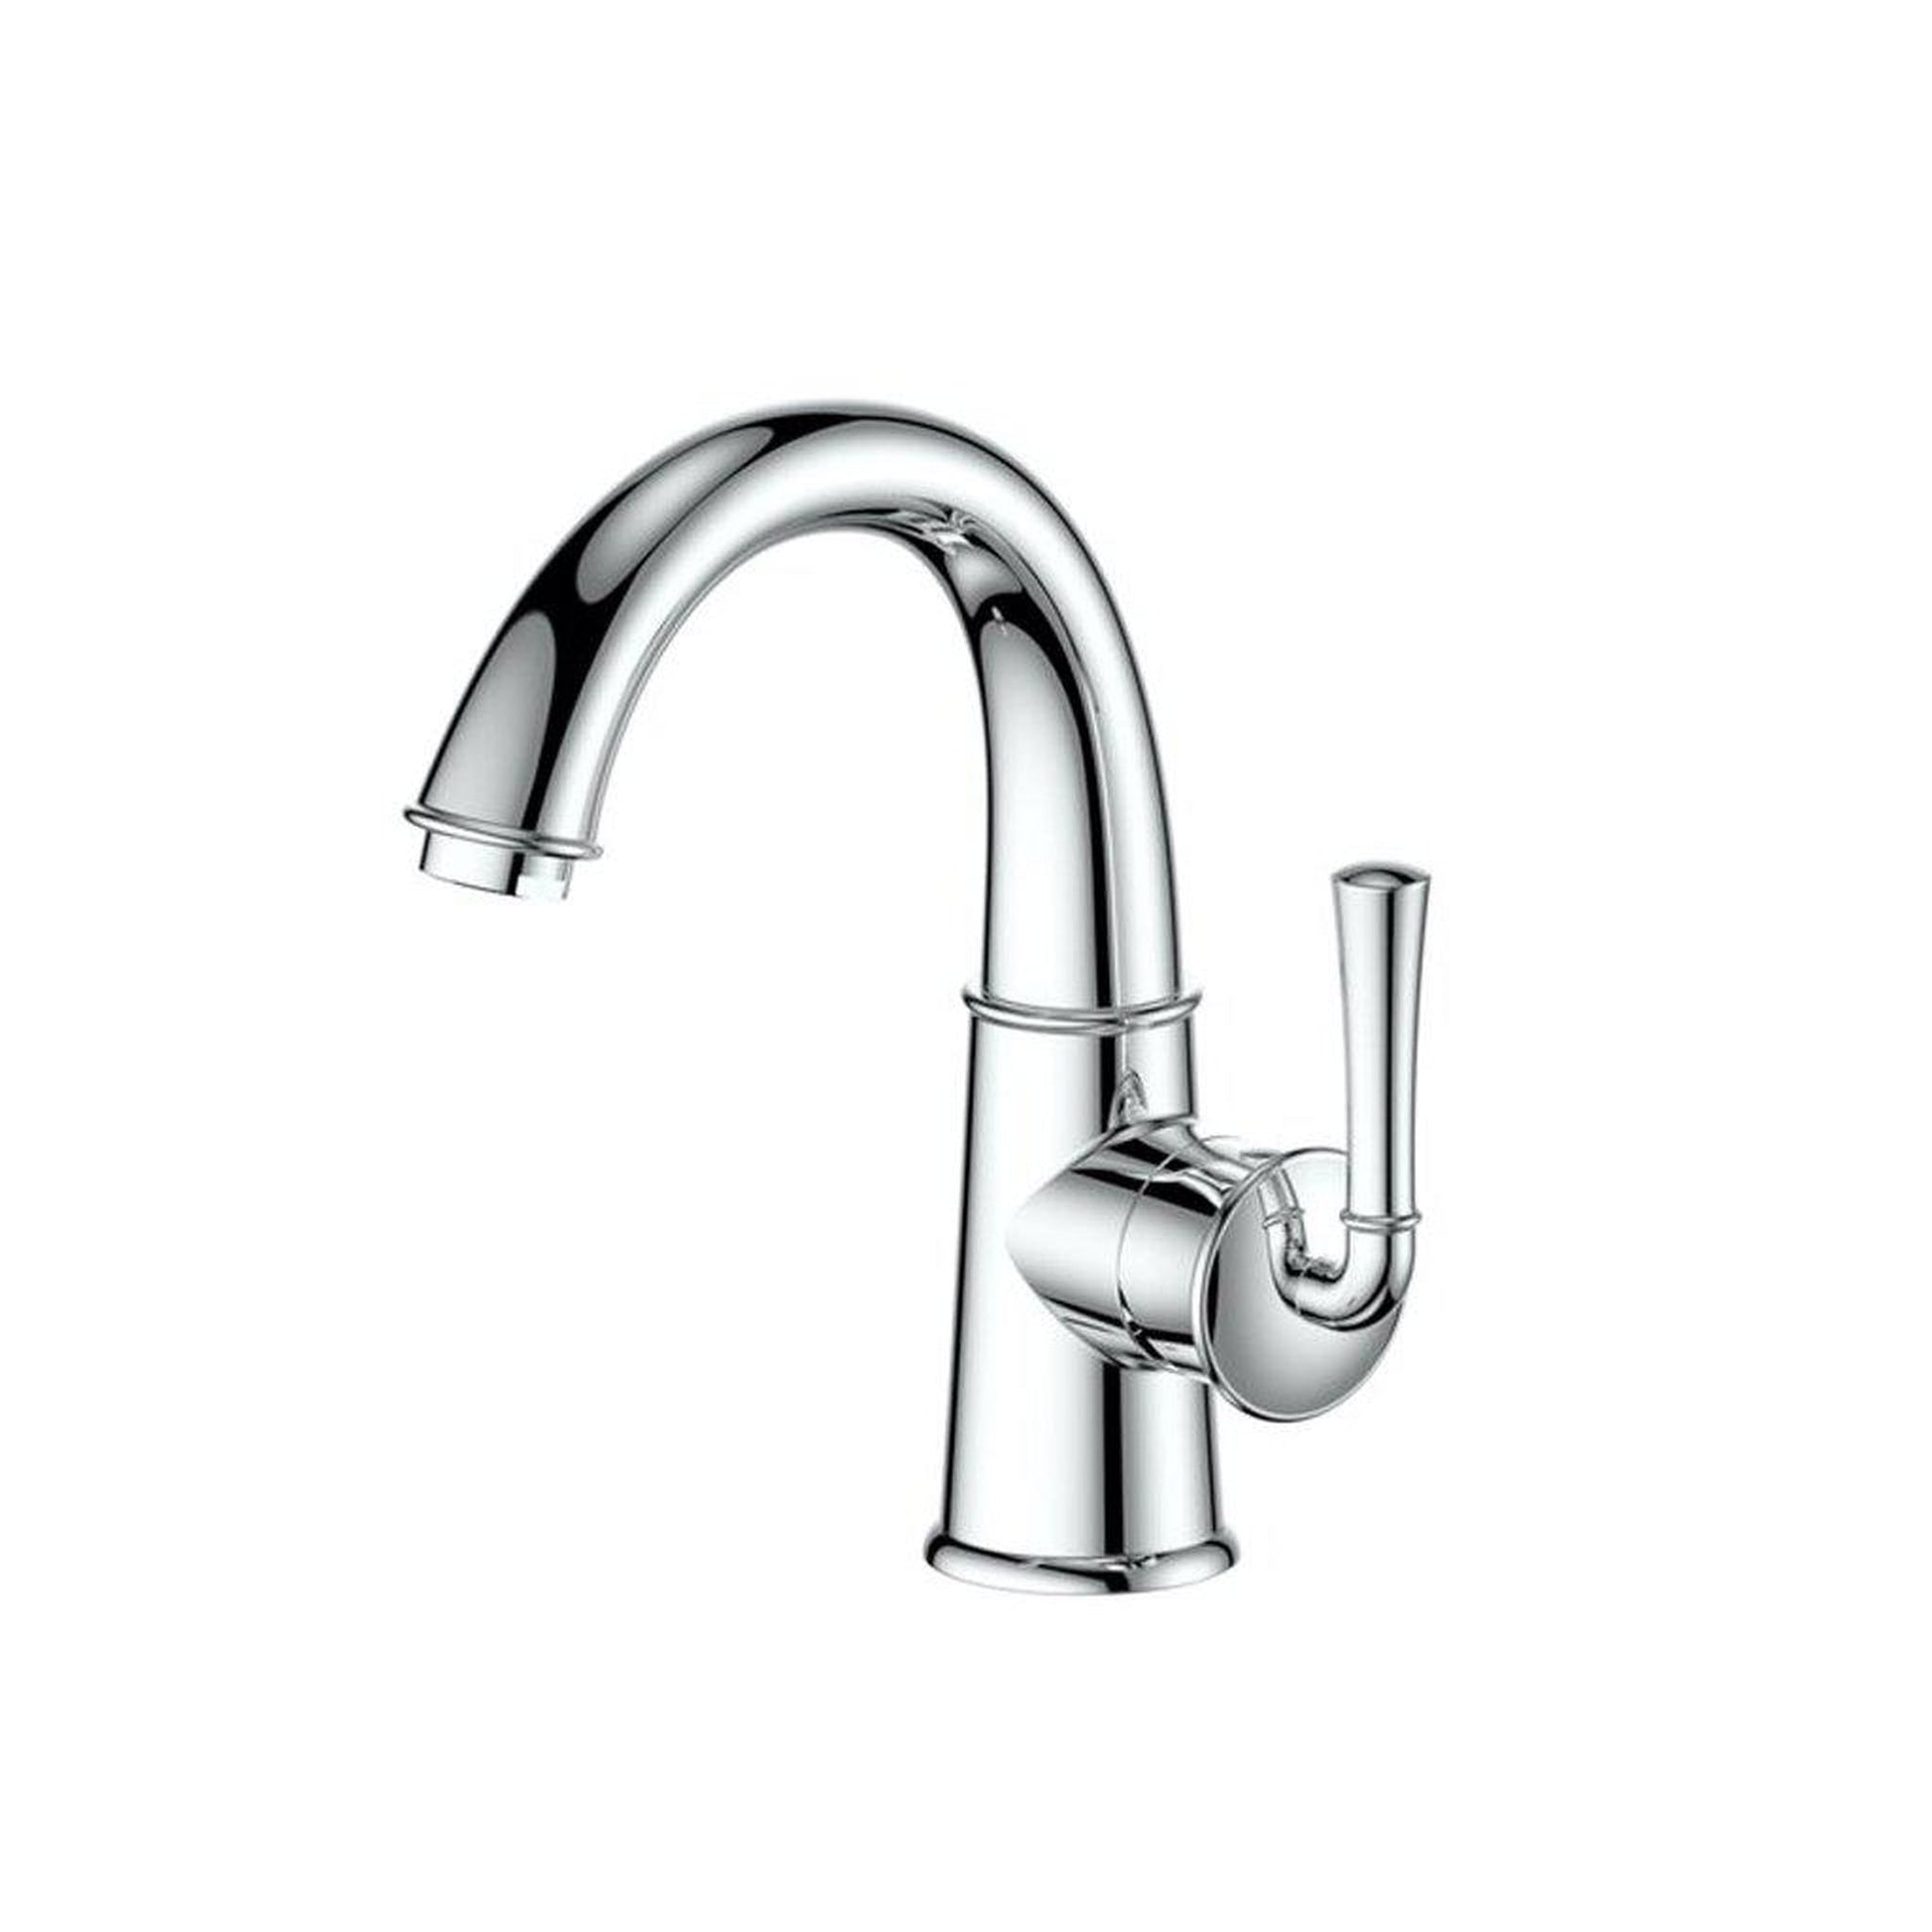 ZLINE Olympic Valley Chrome Single Hole 1.5 Gpm Bathroom Faucet With Drain